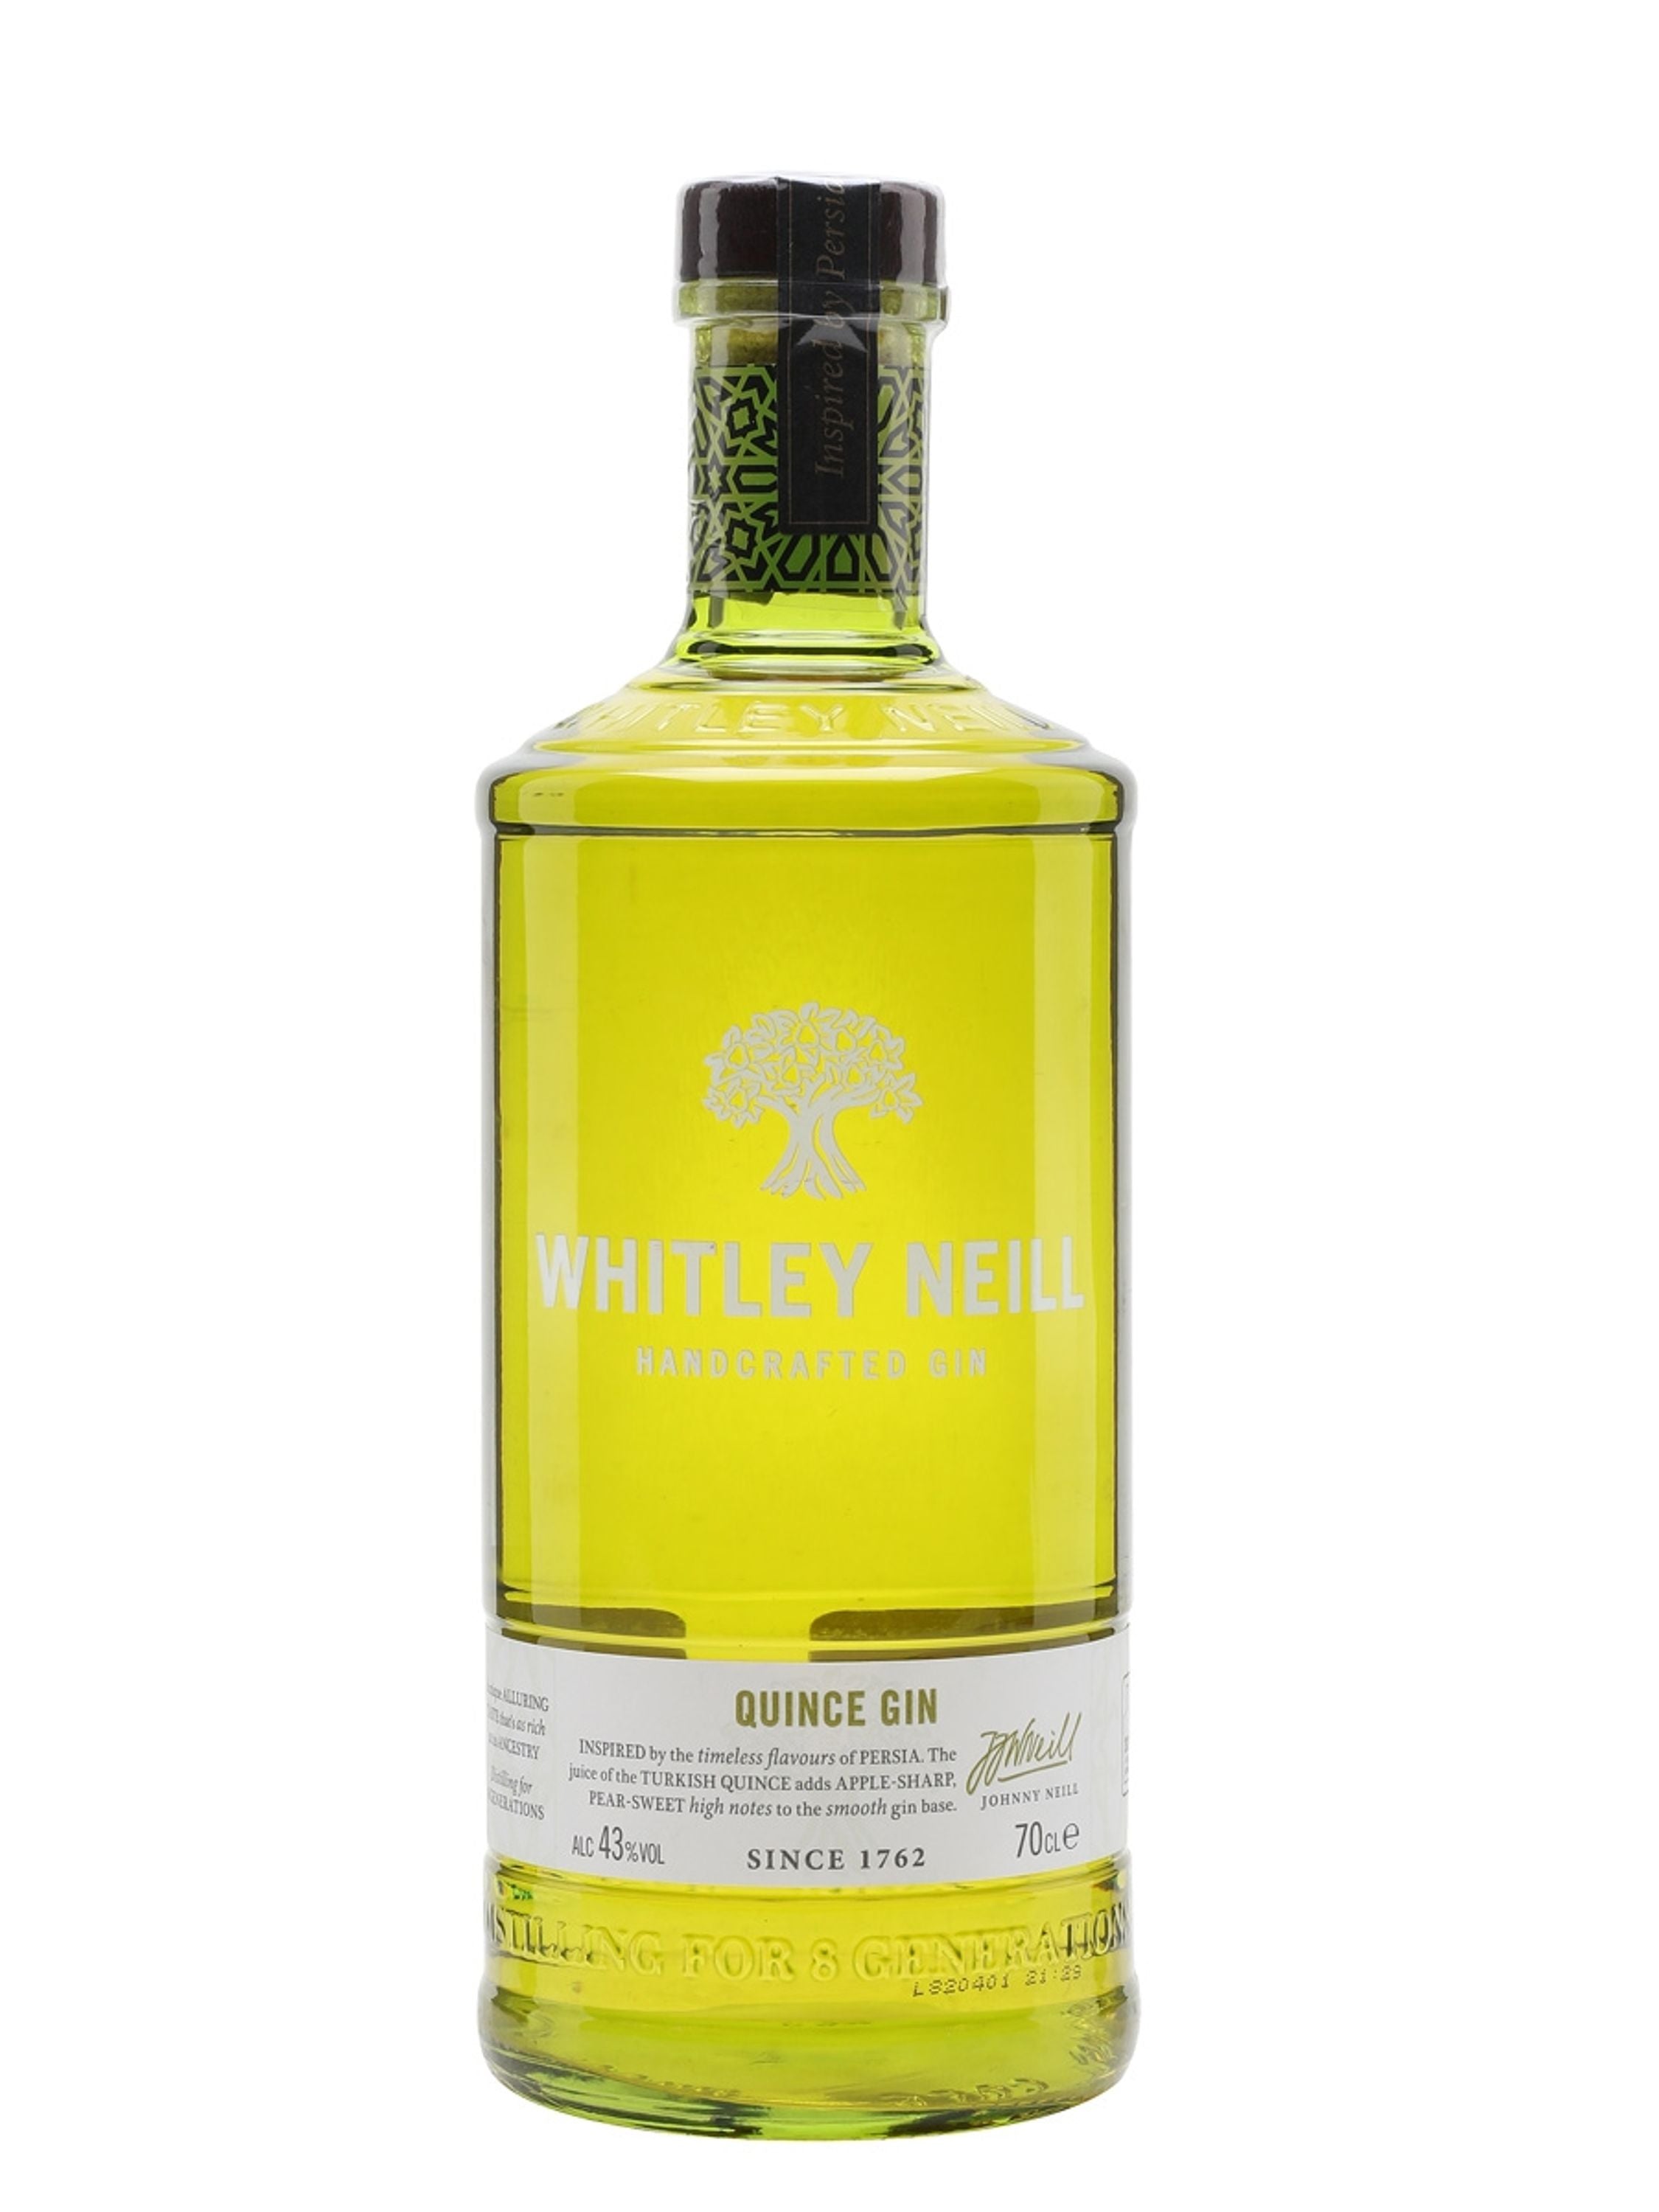 Whitley Neill Quince Gin 0,7l, alc. 43 Vol.-%, Gin England